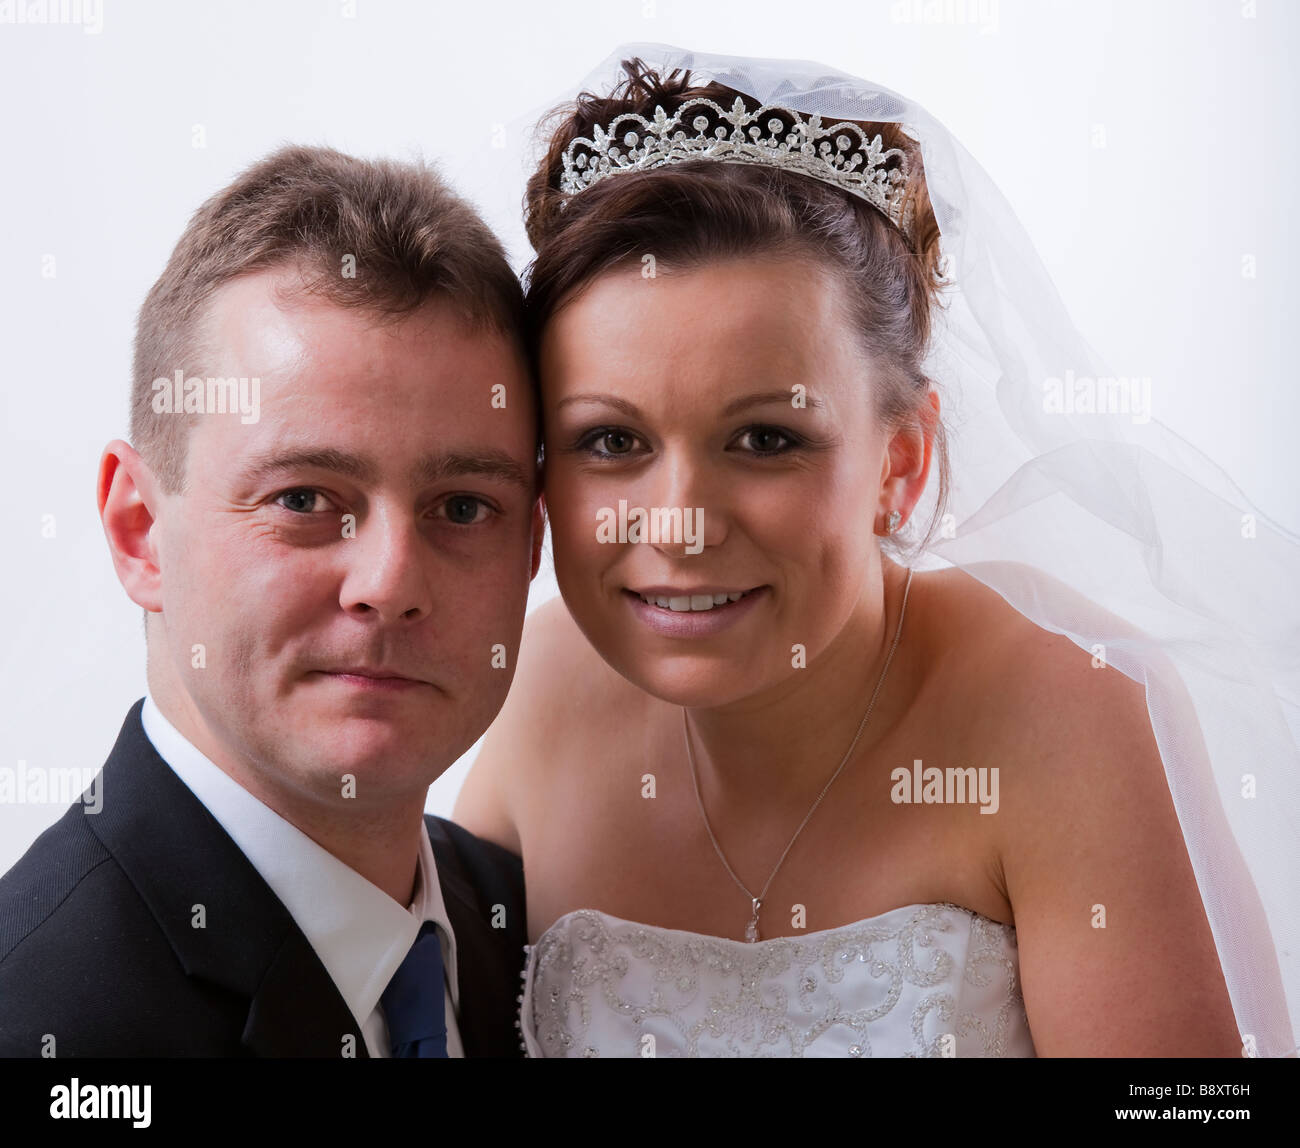 Bride and Groom on wedding day celebrations, marriage ceremony young, happy, pretty, bridal, nuptials Stock Photo